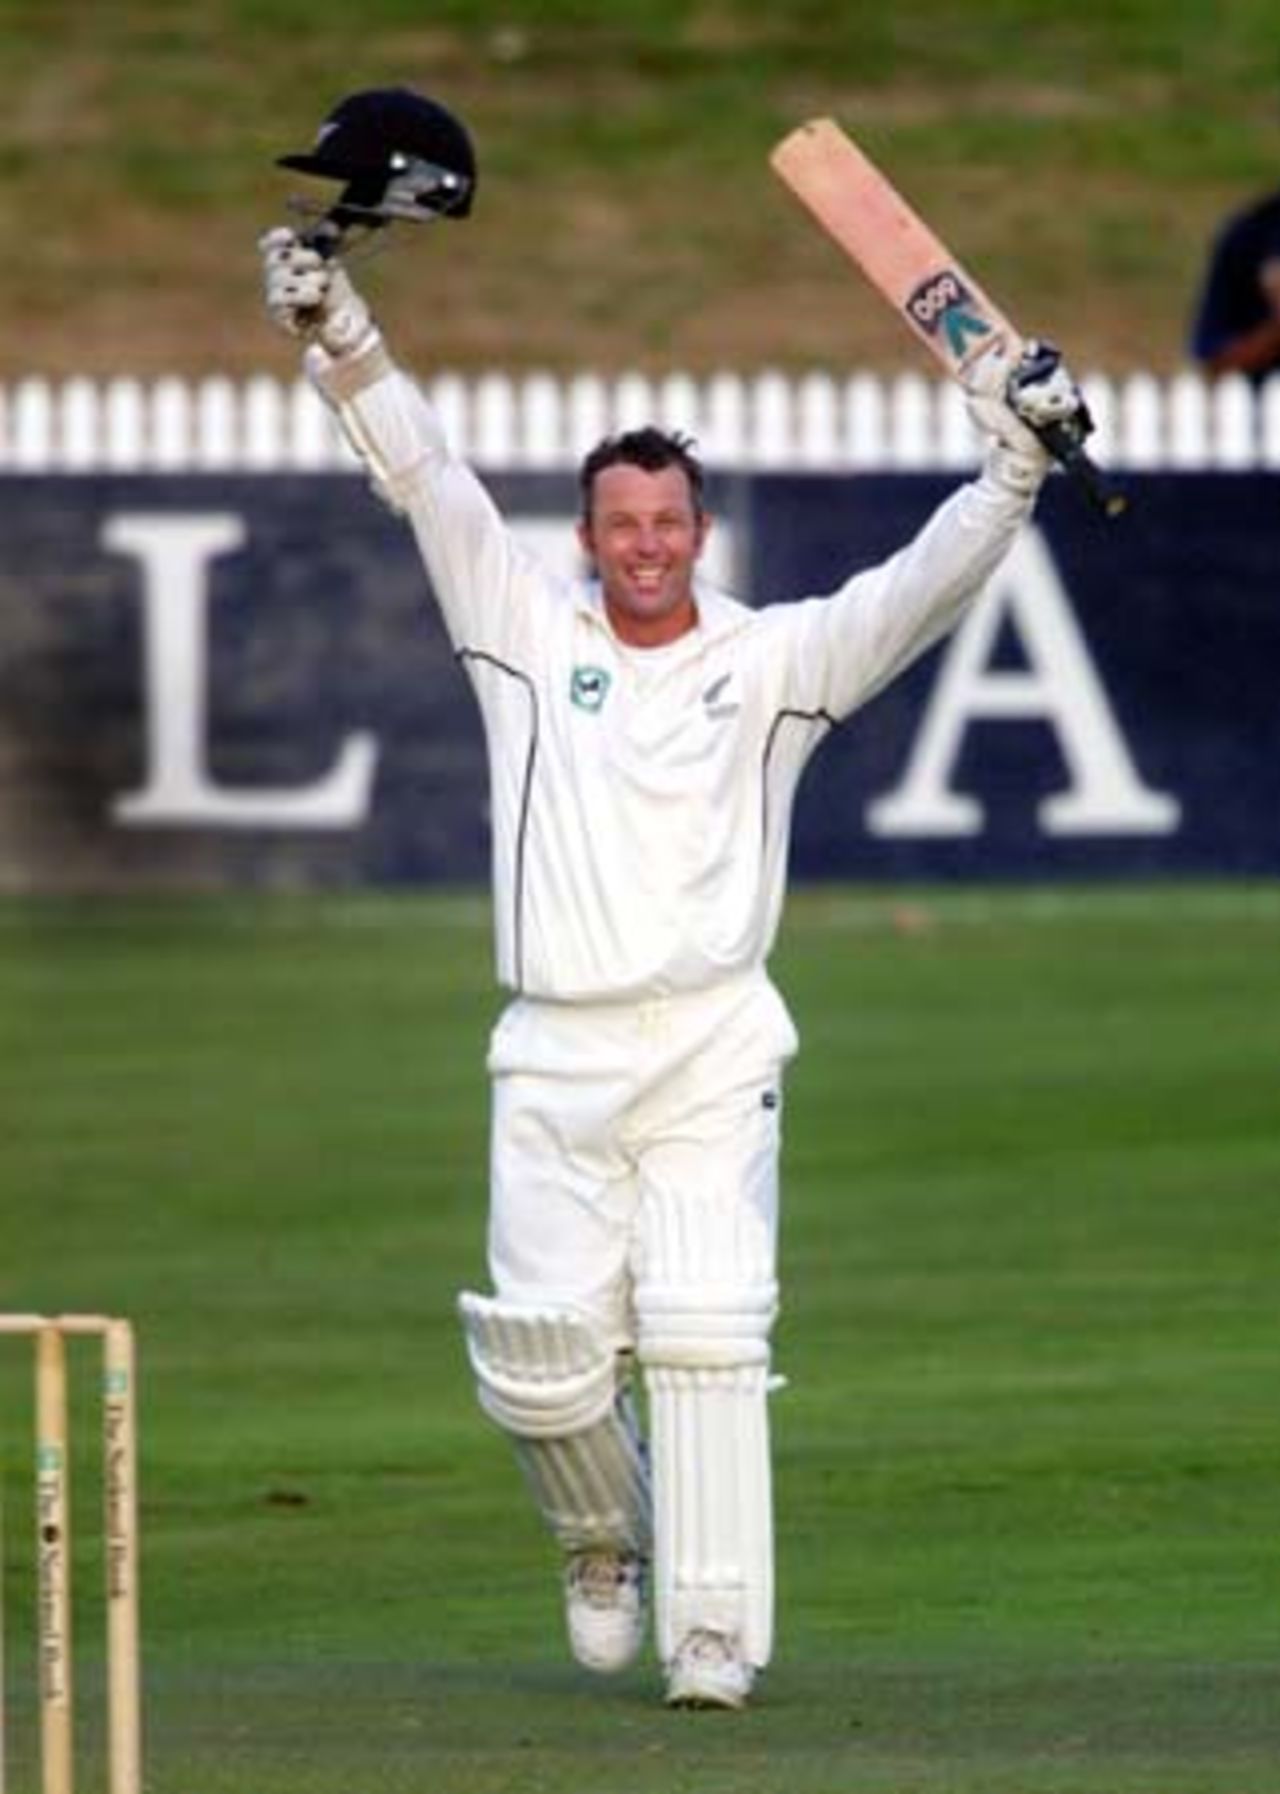 New Zealand opening batsman Mark Richardson raises his helmet and bat in celebration of reaching his maiden Test century. Richardson ended the third day's play on 106 not out in the first innings. 3rd Test: New Zealand v Pakistan at WestpacTrust Park, Hamilton, 27-31 March 2001 (Day 3).